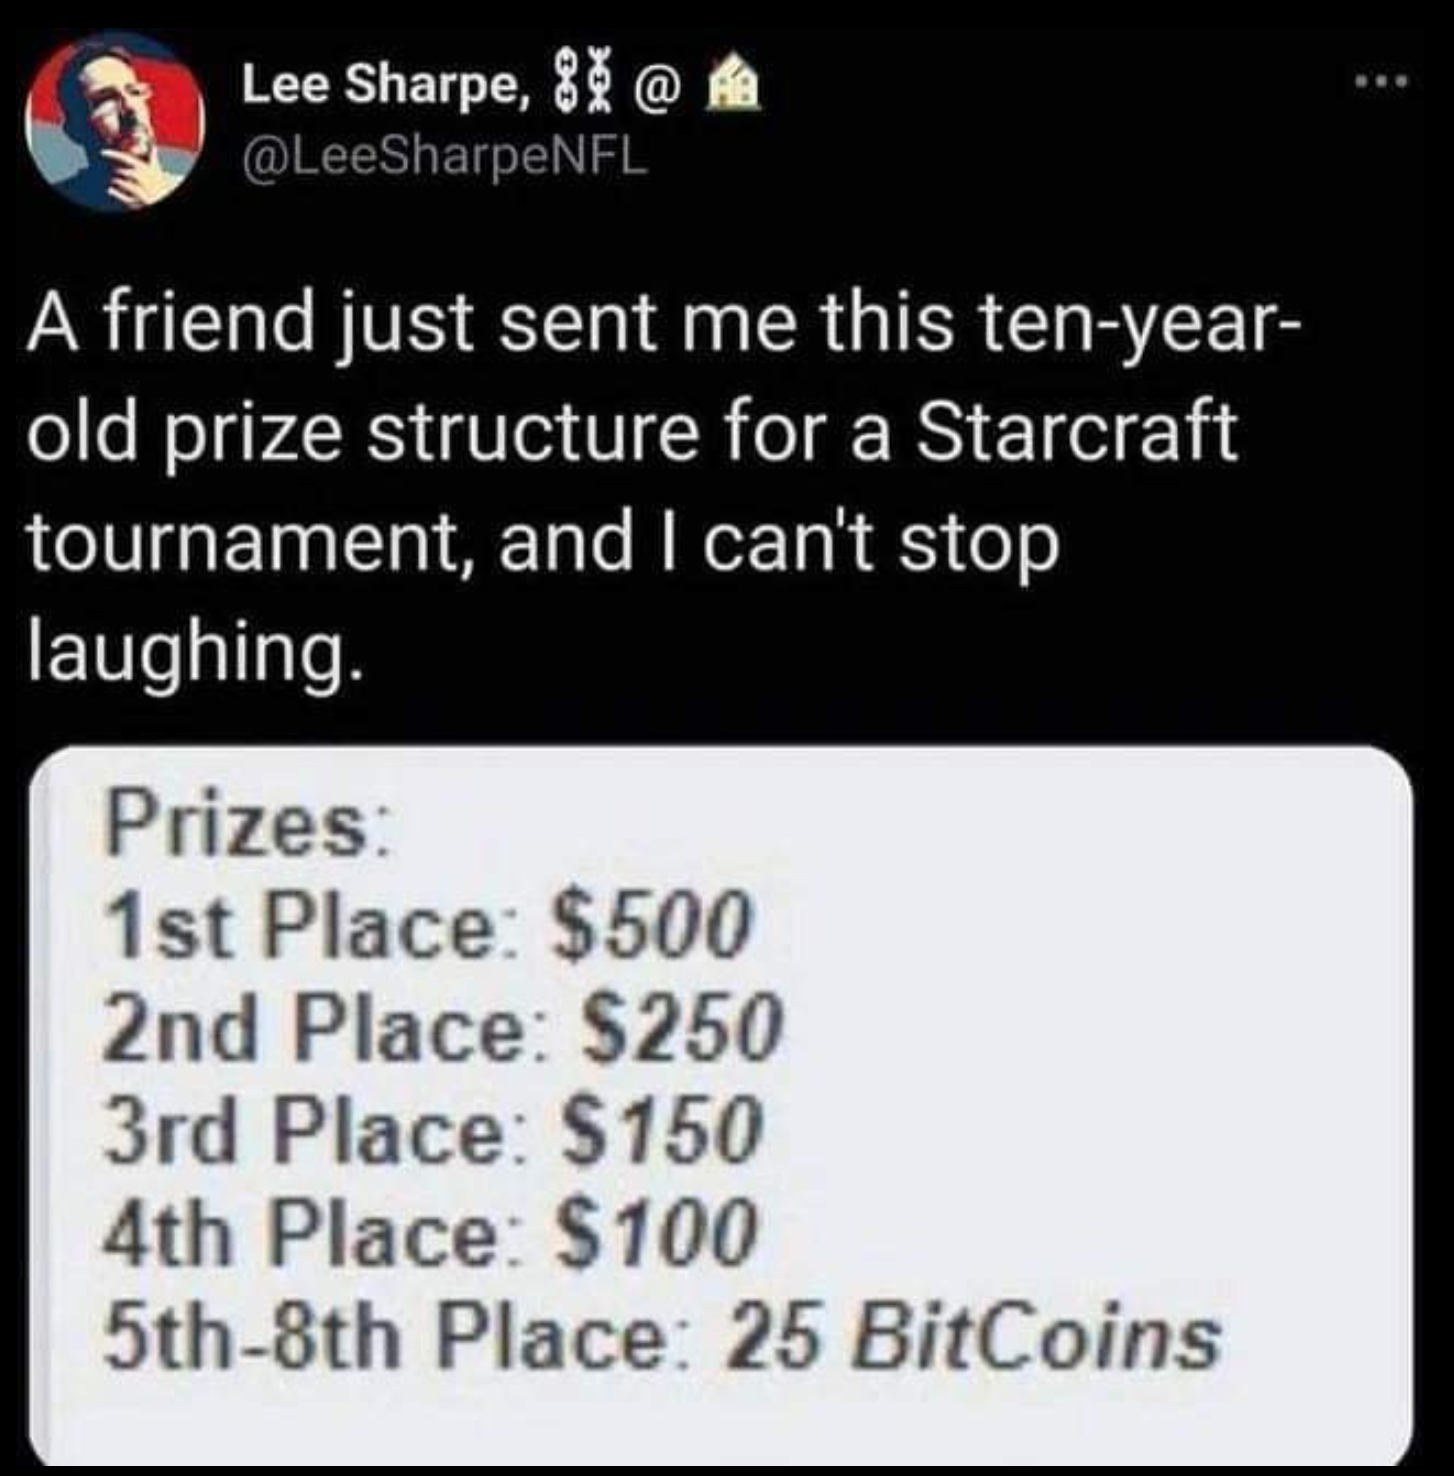 funny gaming memes - multimedia - Lee Sharpe, 81 @ A friend just sent me this tenyear old prize structure for a Starcraft tournament, and I can't stop laughing. Prizes 1st Place $500 2nd Place $250 3rd Place $150 4th Place $100 5th8th Place 25 BitCoins